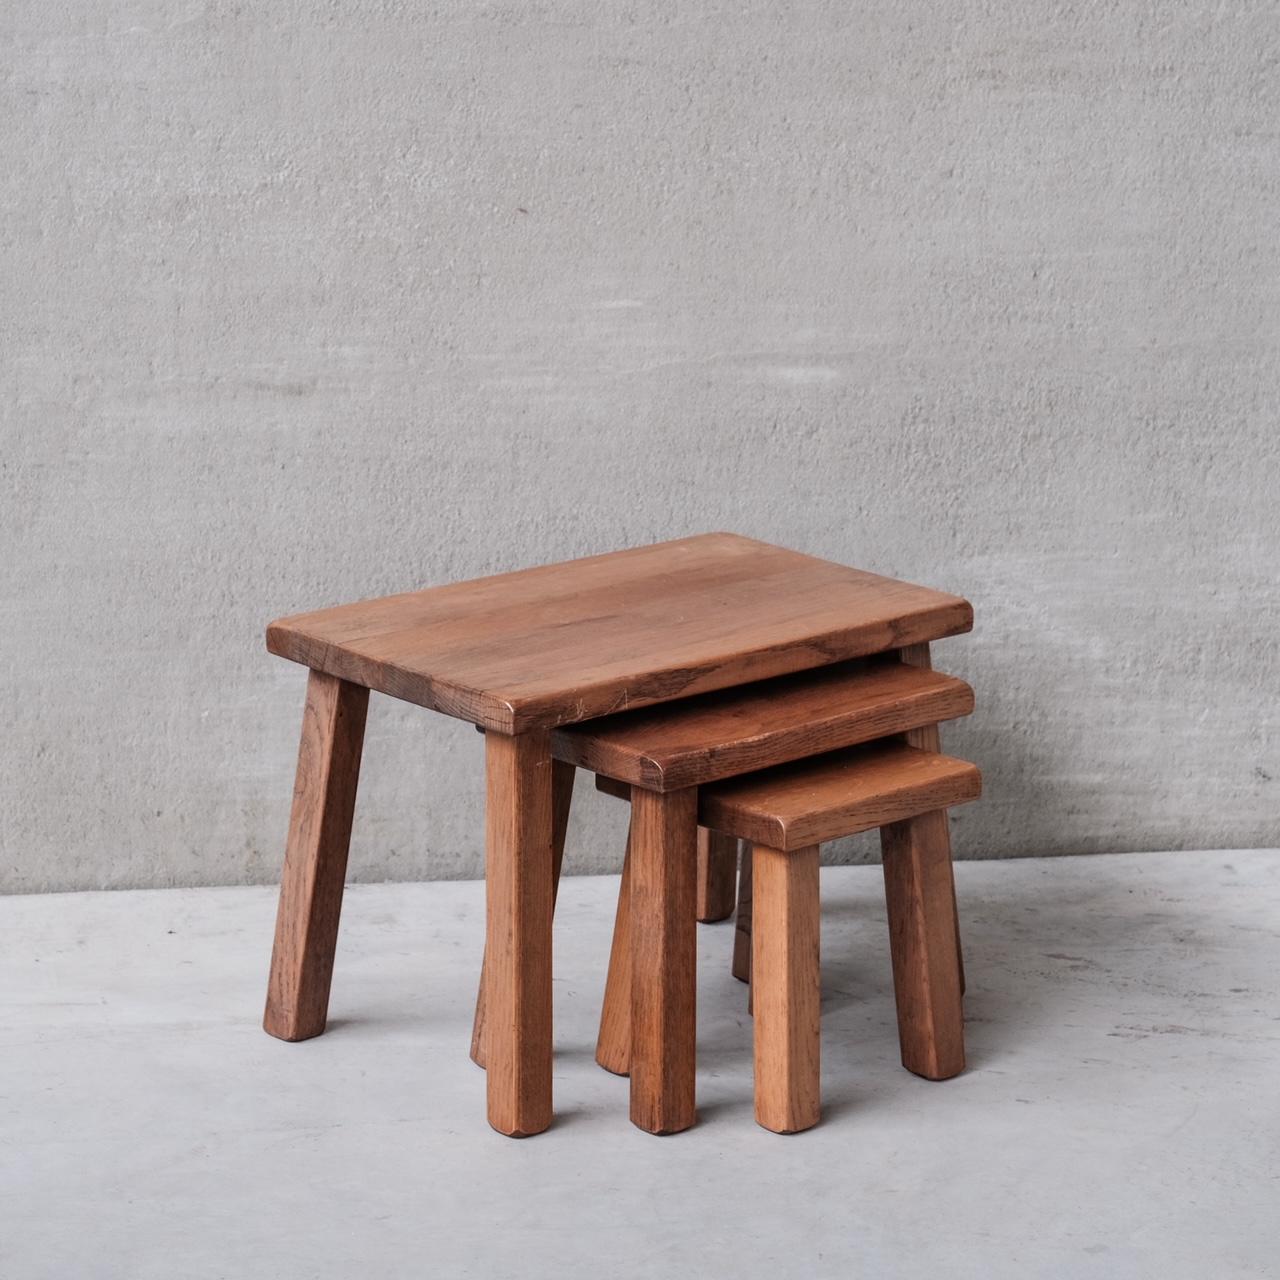 A set of three nesting tables.

Belgium, c1970s.

Simple strong sharp lines. Functional as a nesting set or used around the room separately.

Oak.

Good vintage condition.

Dimensions taken for the tallest table.

Internal Reference: